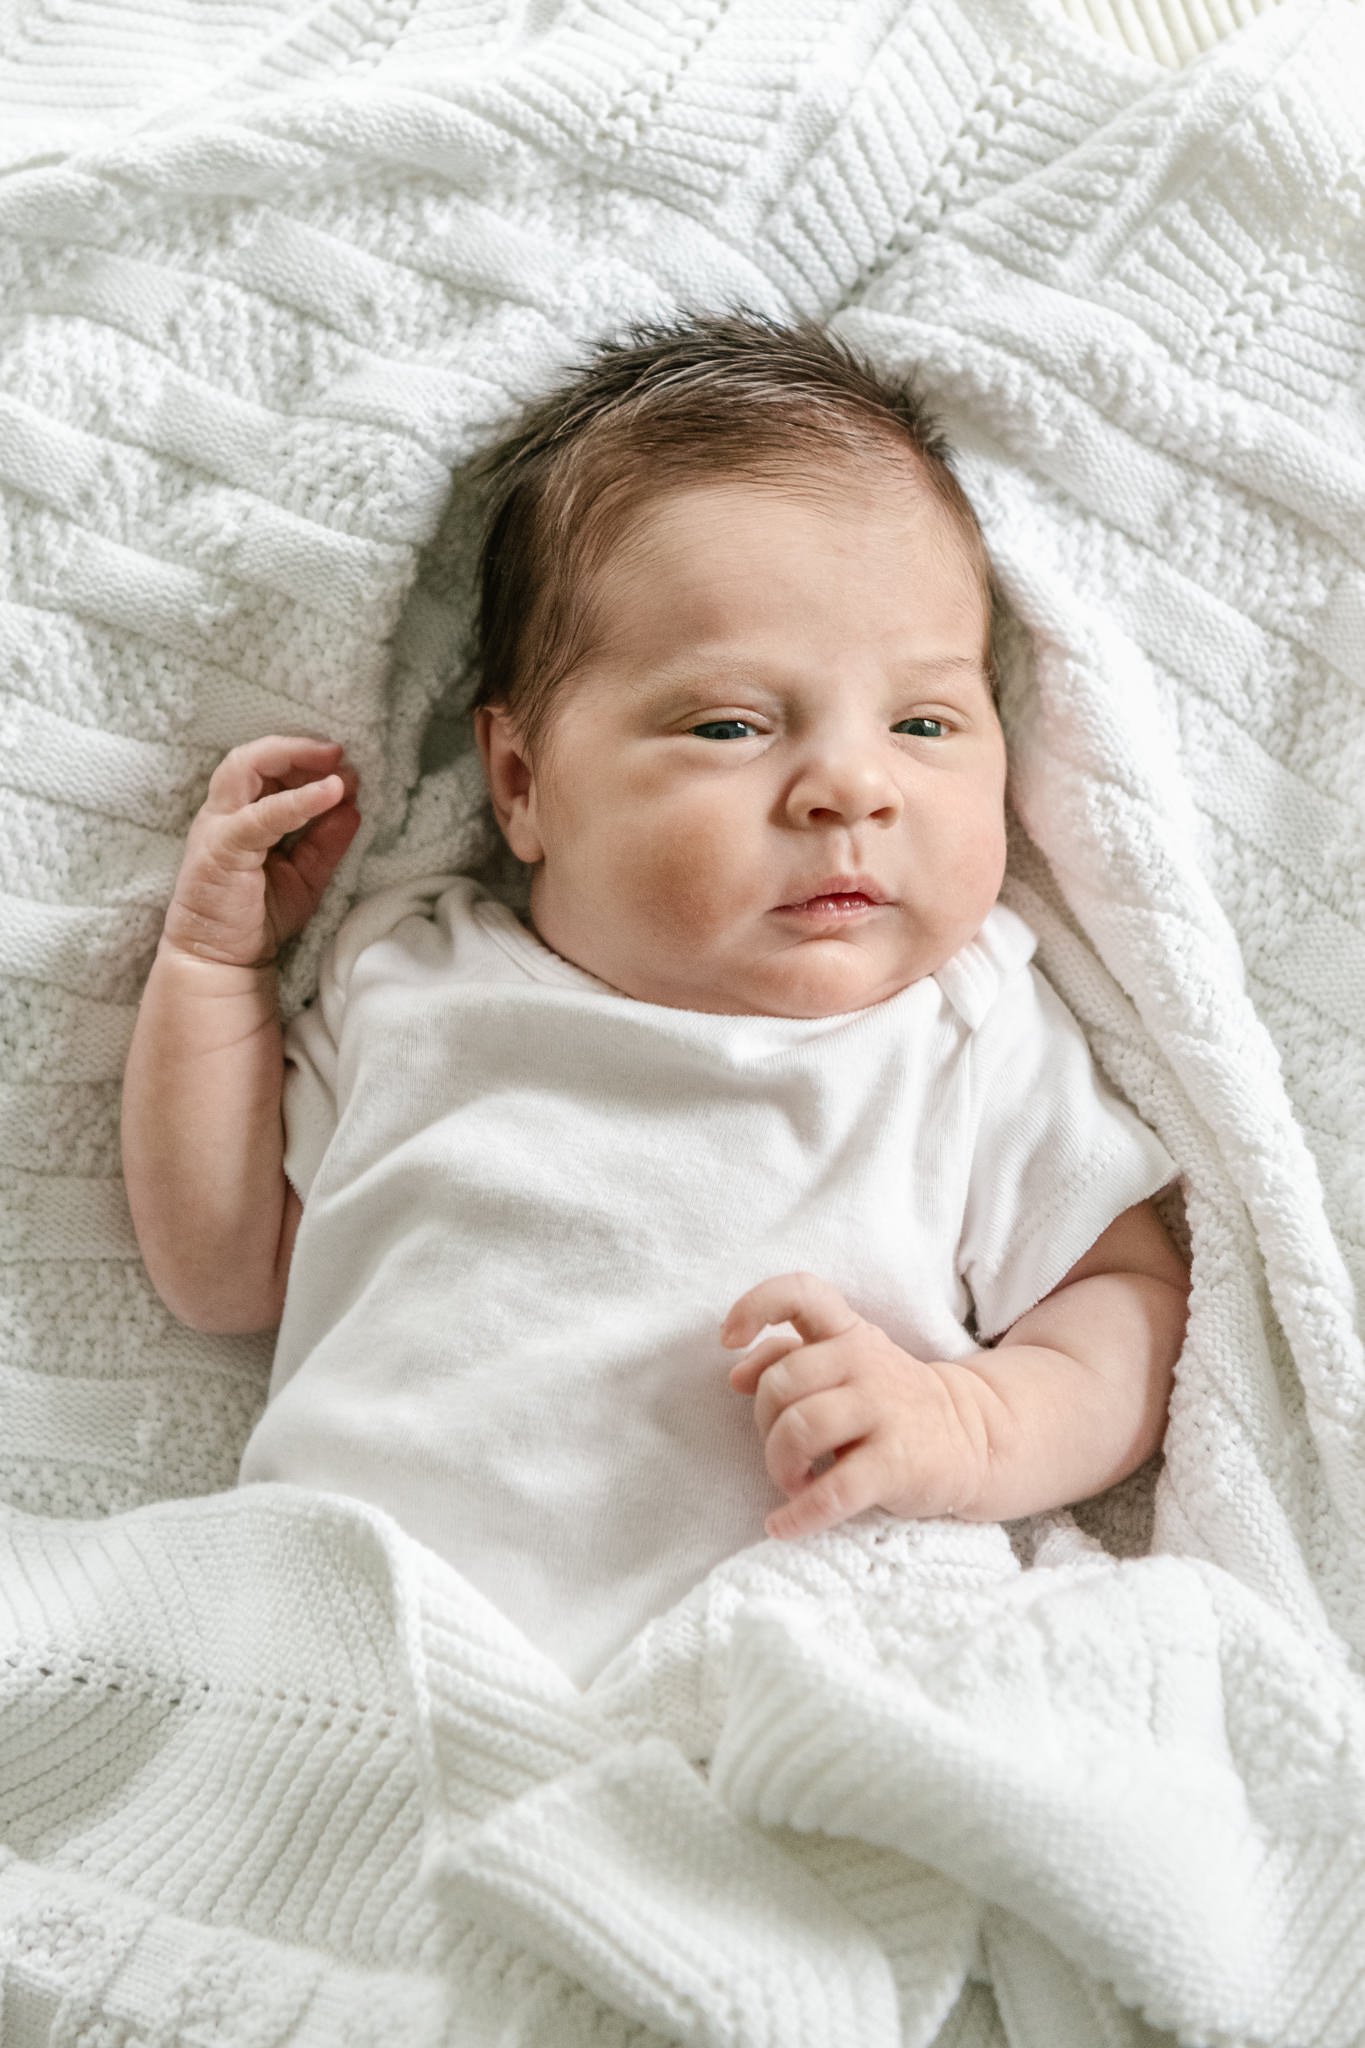  New Jersey newborn photographer captures a baby girl in her new home with her eyes open, Nicole Hawkins photography. eyes open chunky girl #NicoleHawkinsPhotography #NicoleHawkinsNewborns #MontclairNewbornPhotographer #InHomeNewborns #NJNewborns #Ba